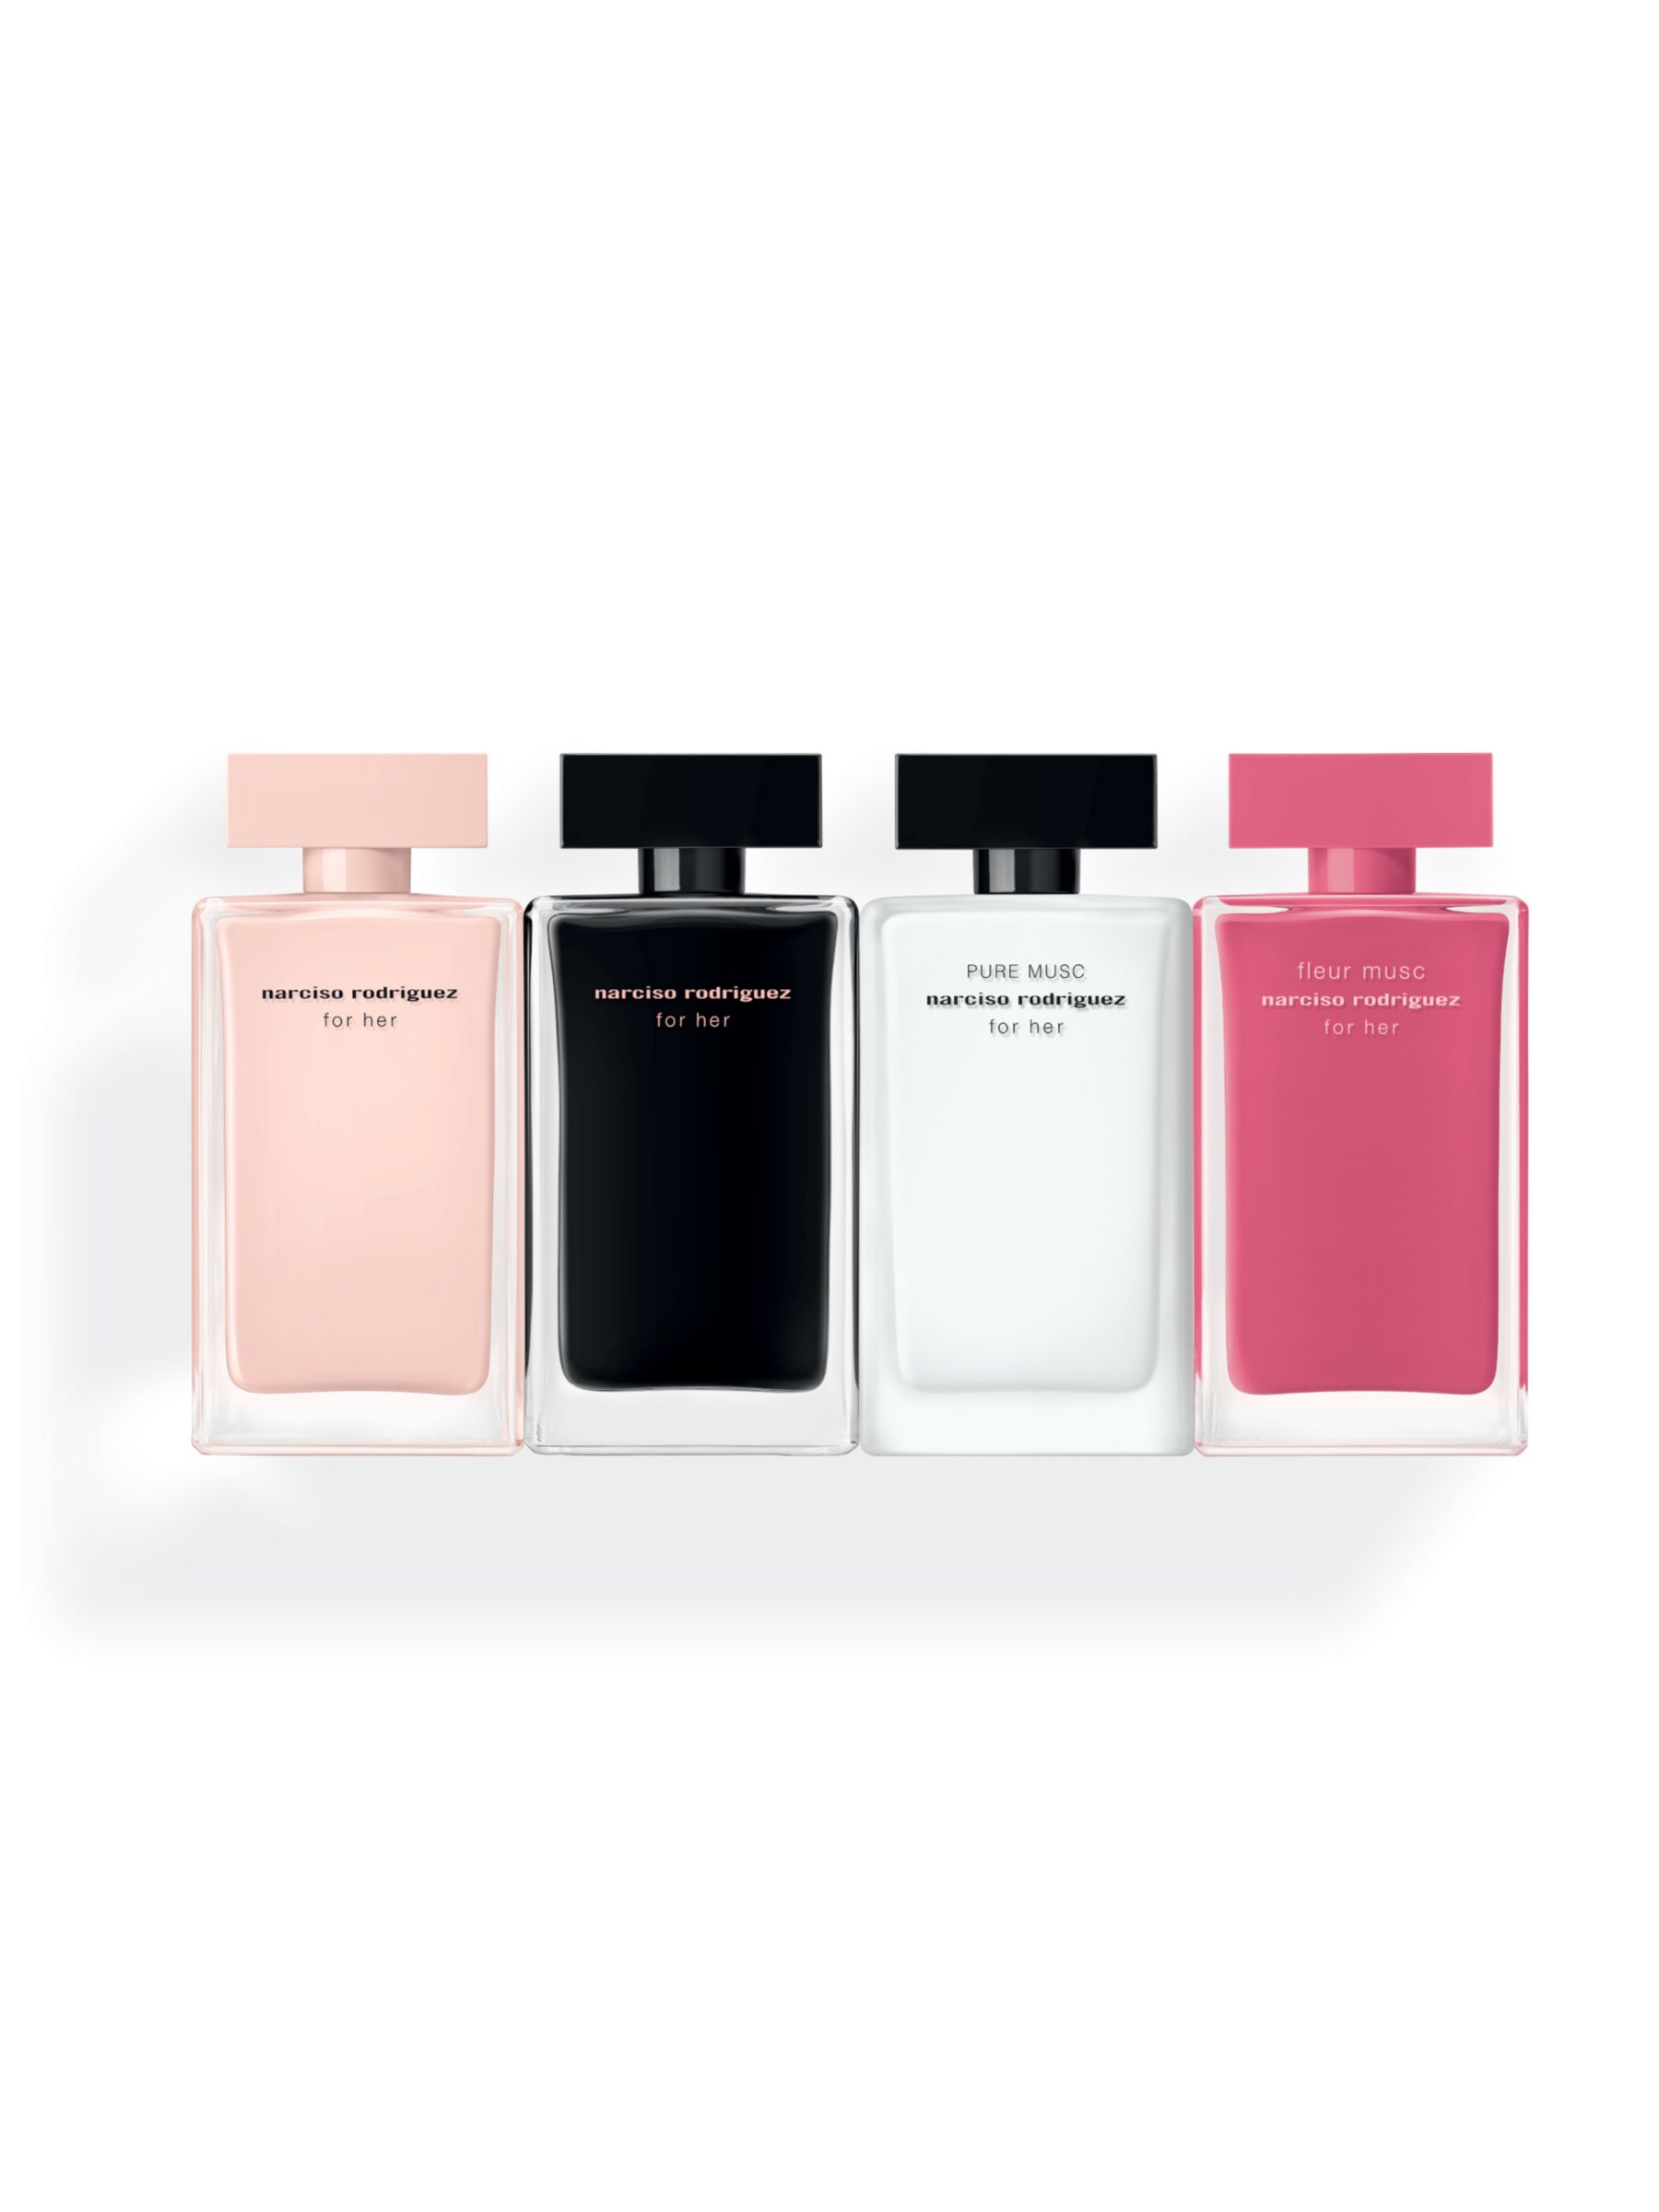 narciso rodriguez perfume for women